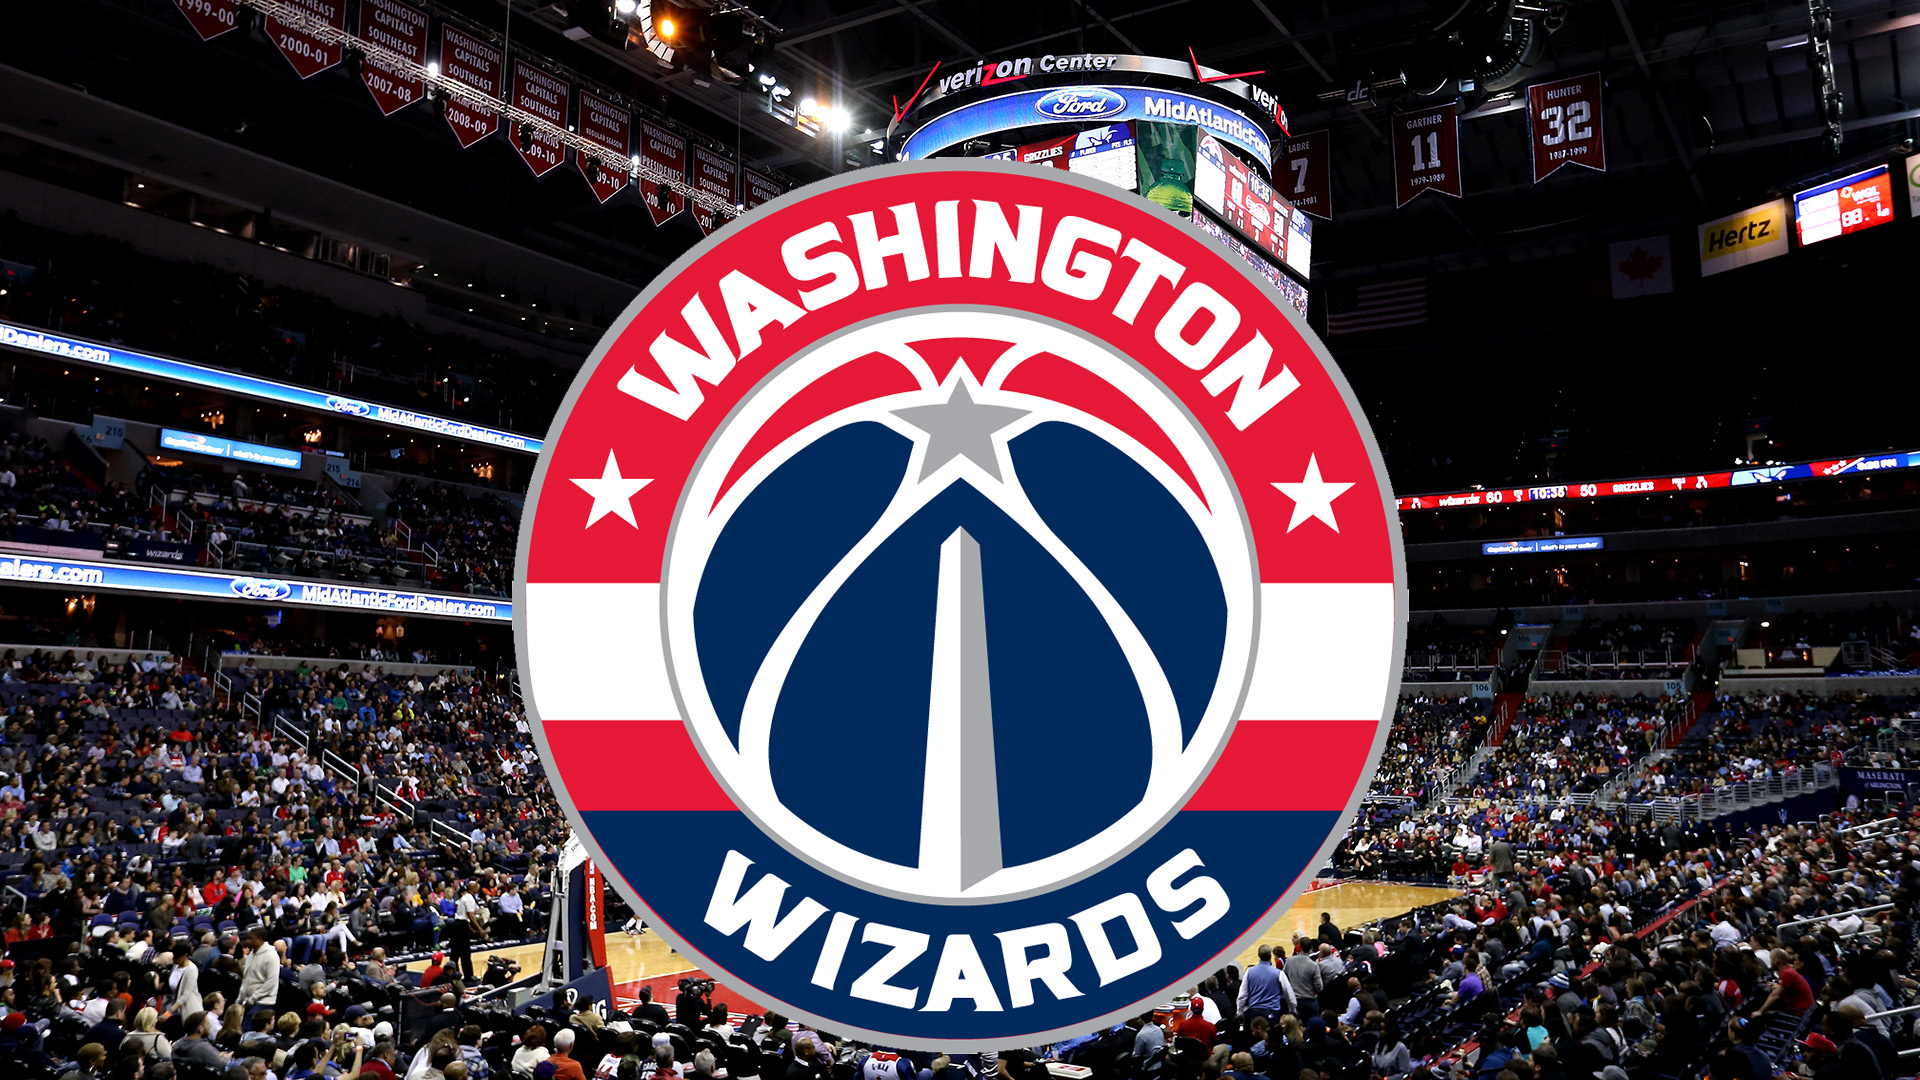 Know your NBA playoff team visual history, Wizards edition NBA